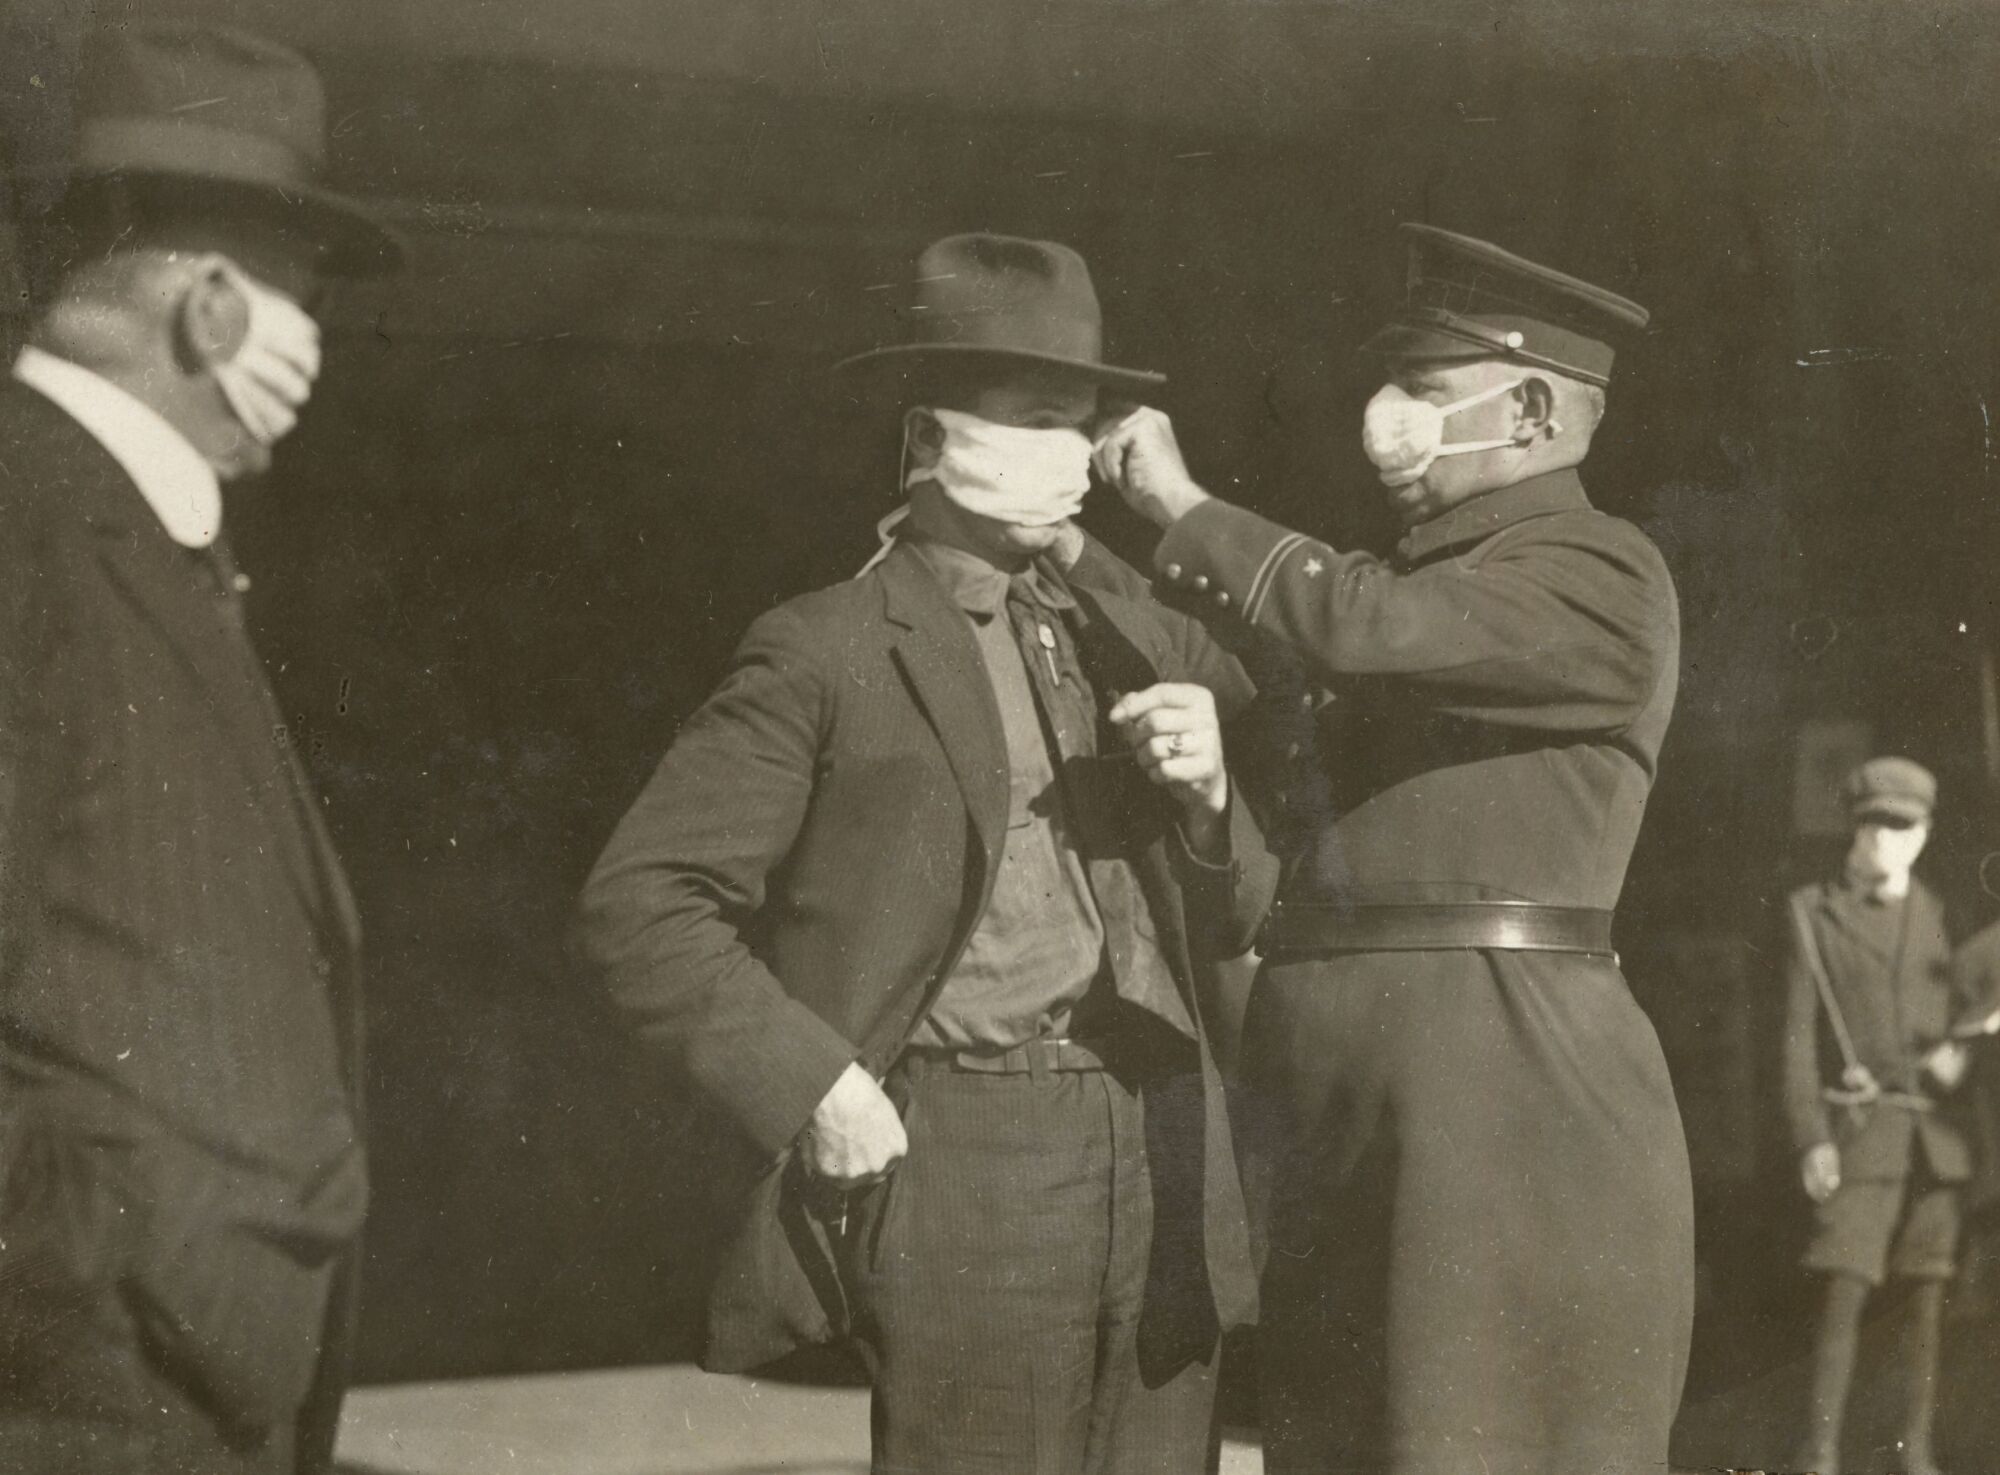  A police officer adjusts a man's flu mask in San Francisco during the 1918 pandemic. 